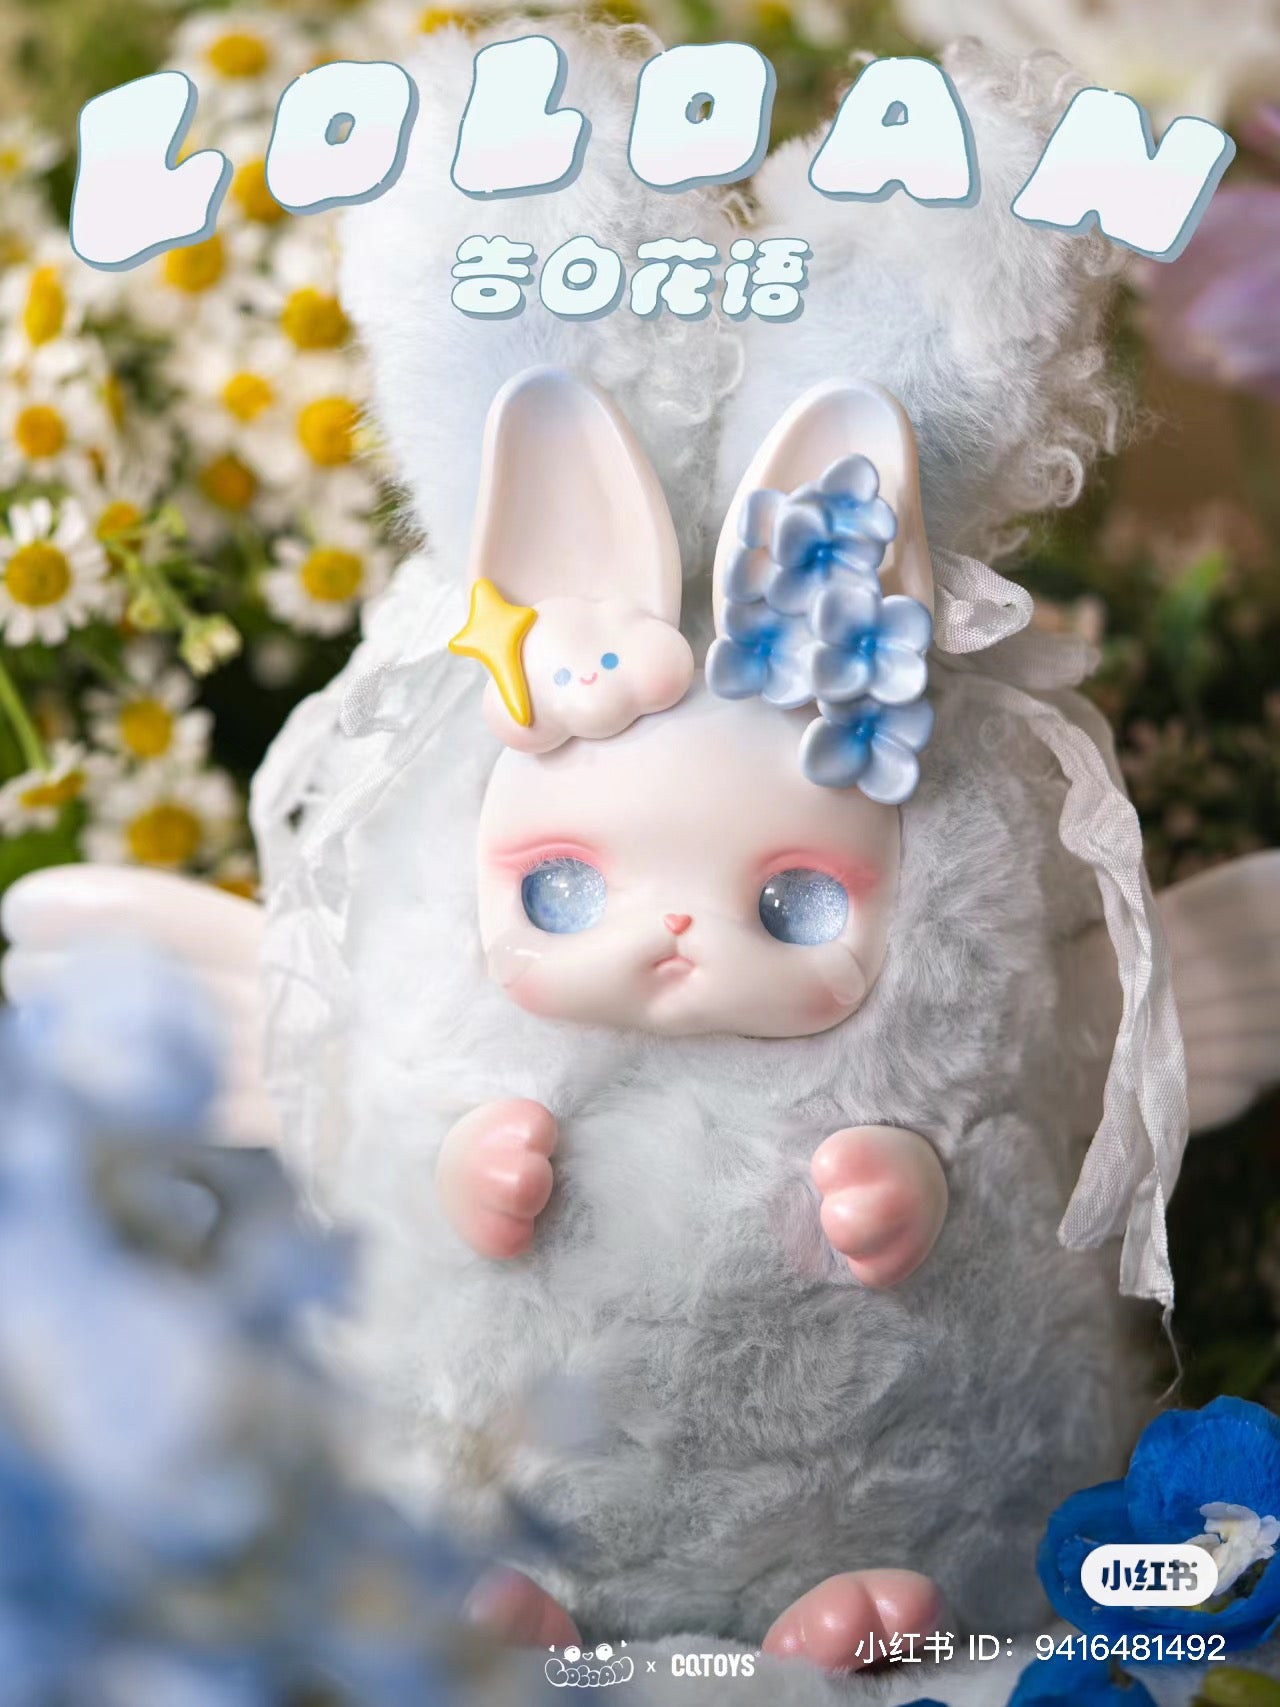 A blind box series featuring Loloan- Confession Language toys, including a white stuffed animal with blue eyes and a bunny adorned with flowers. From Strangecat Toys.